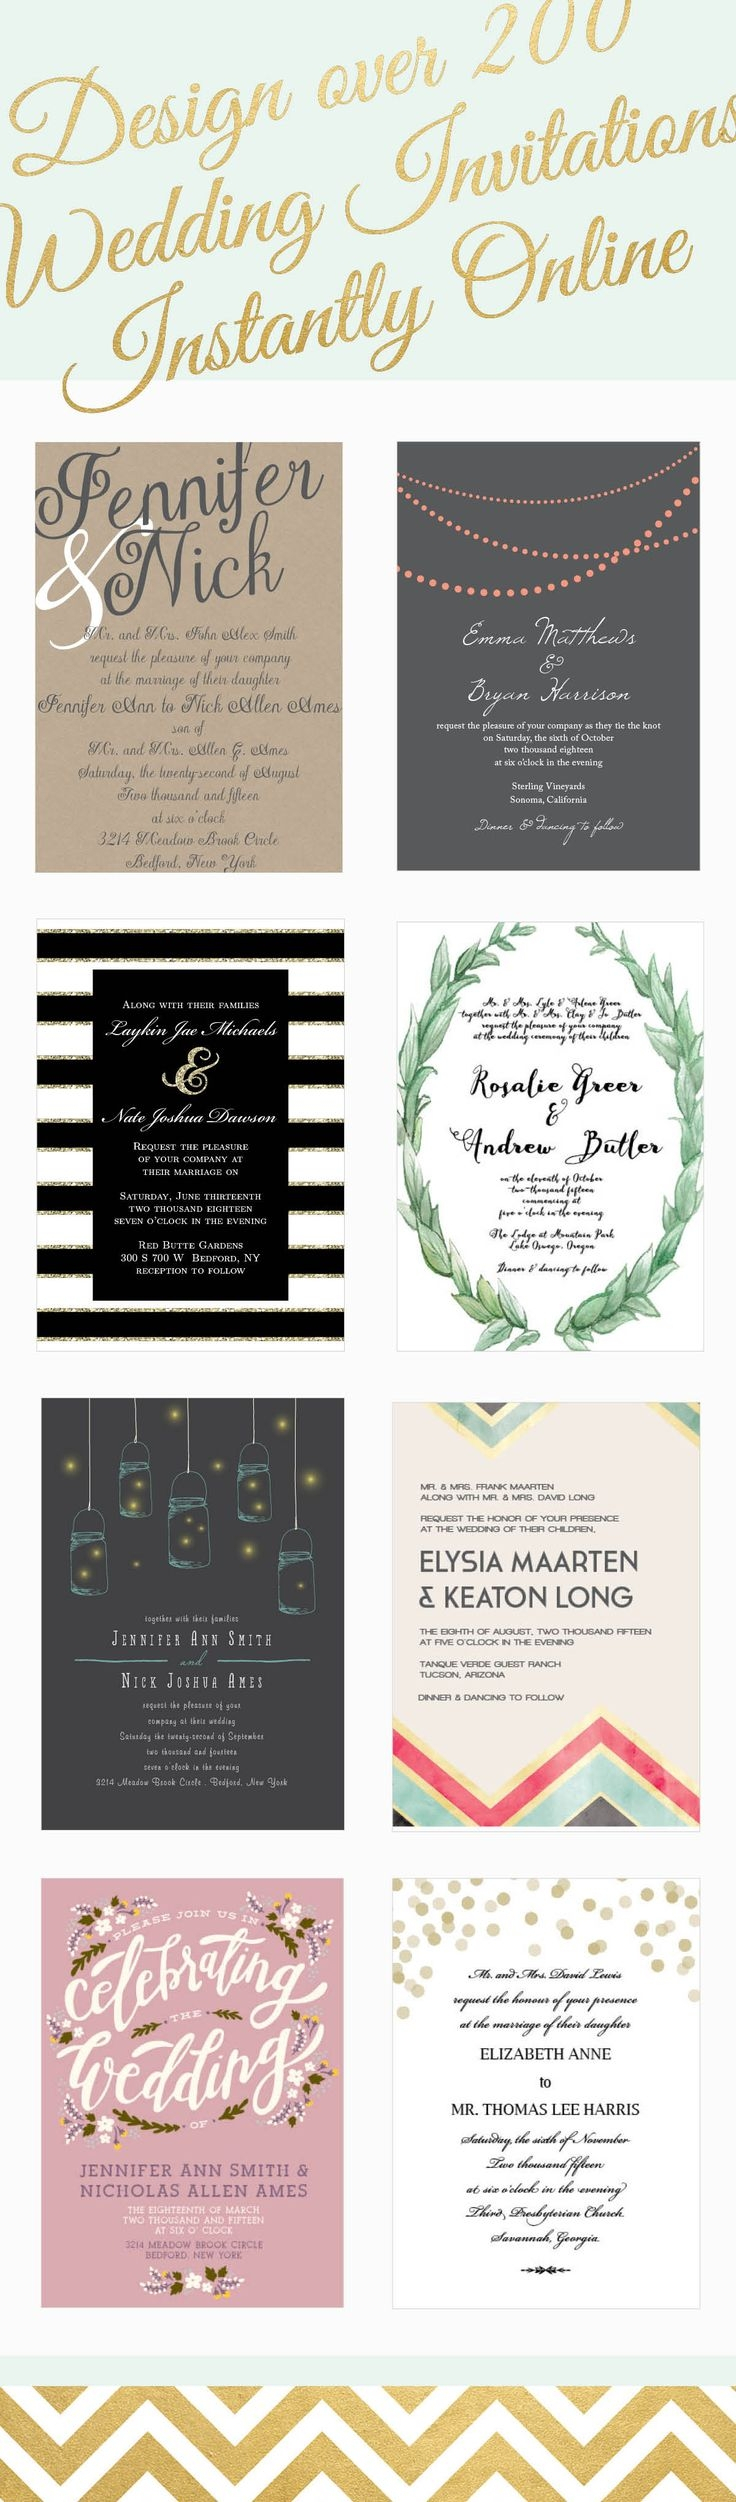 Reception Only Wedding Invitations Awesome Wedding Invitations Reception Only Design Stmexhibit